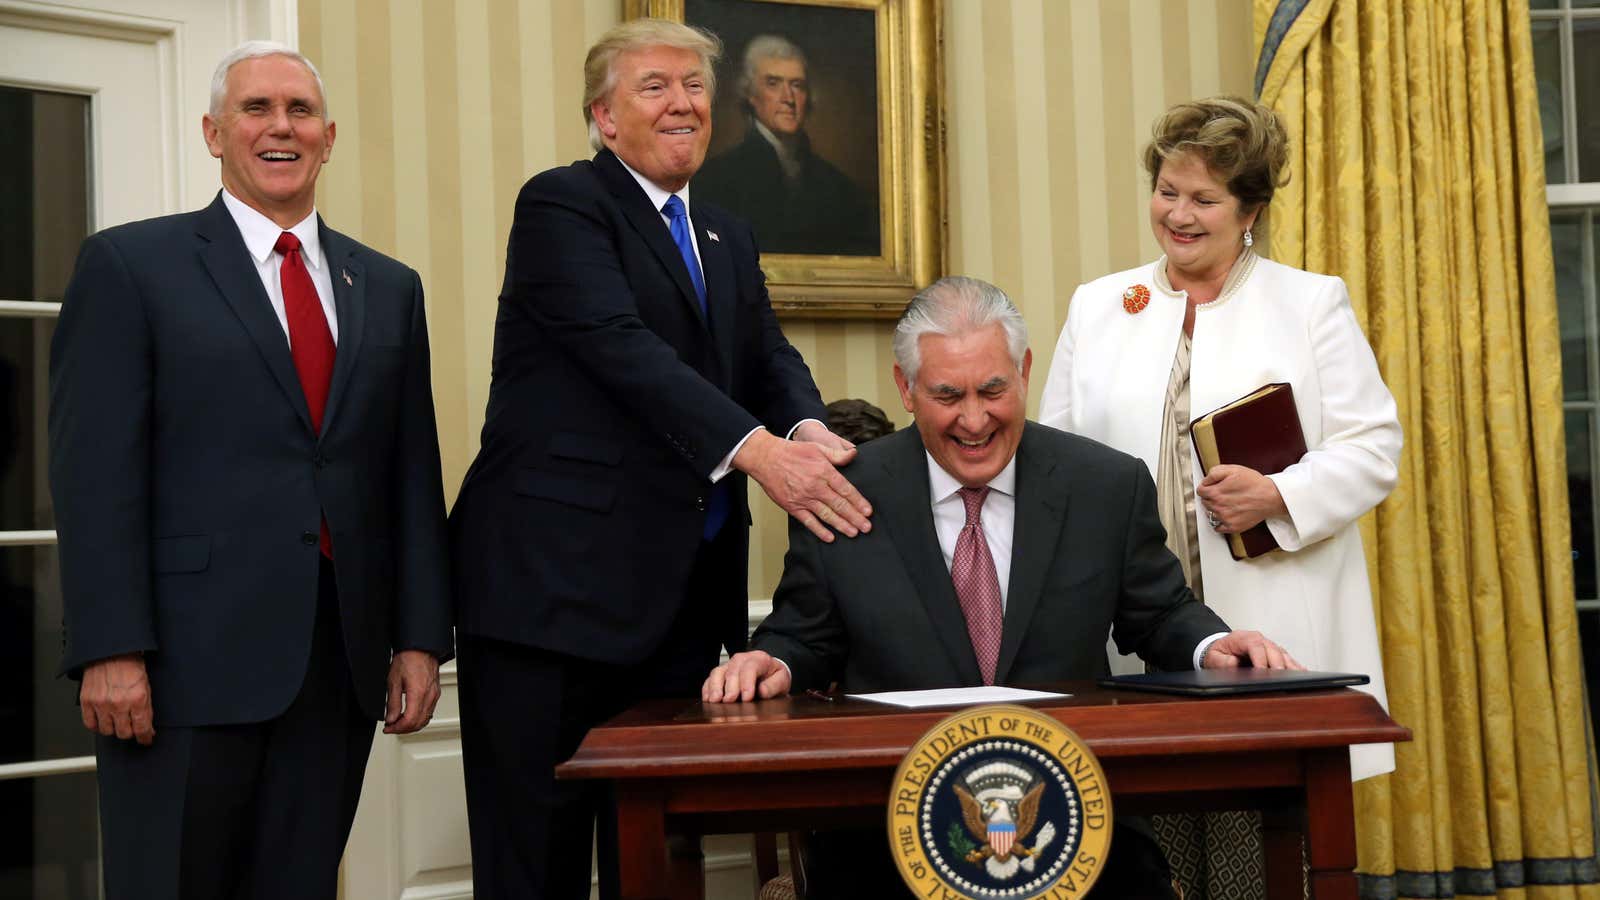 Former Exxon Mobil CEO Tillerson has been sidelined since his swearing-in.